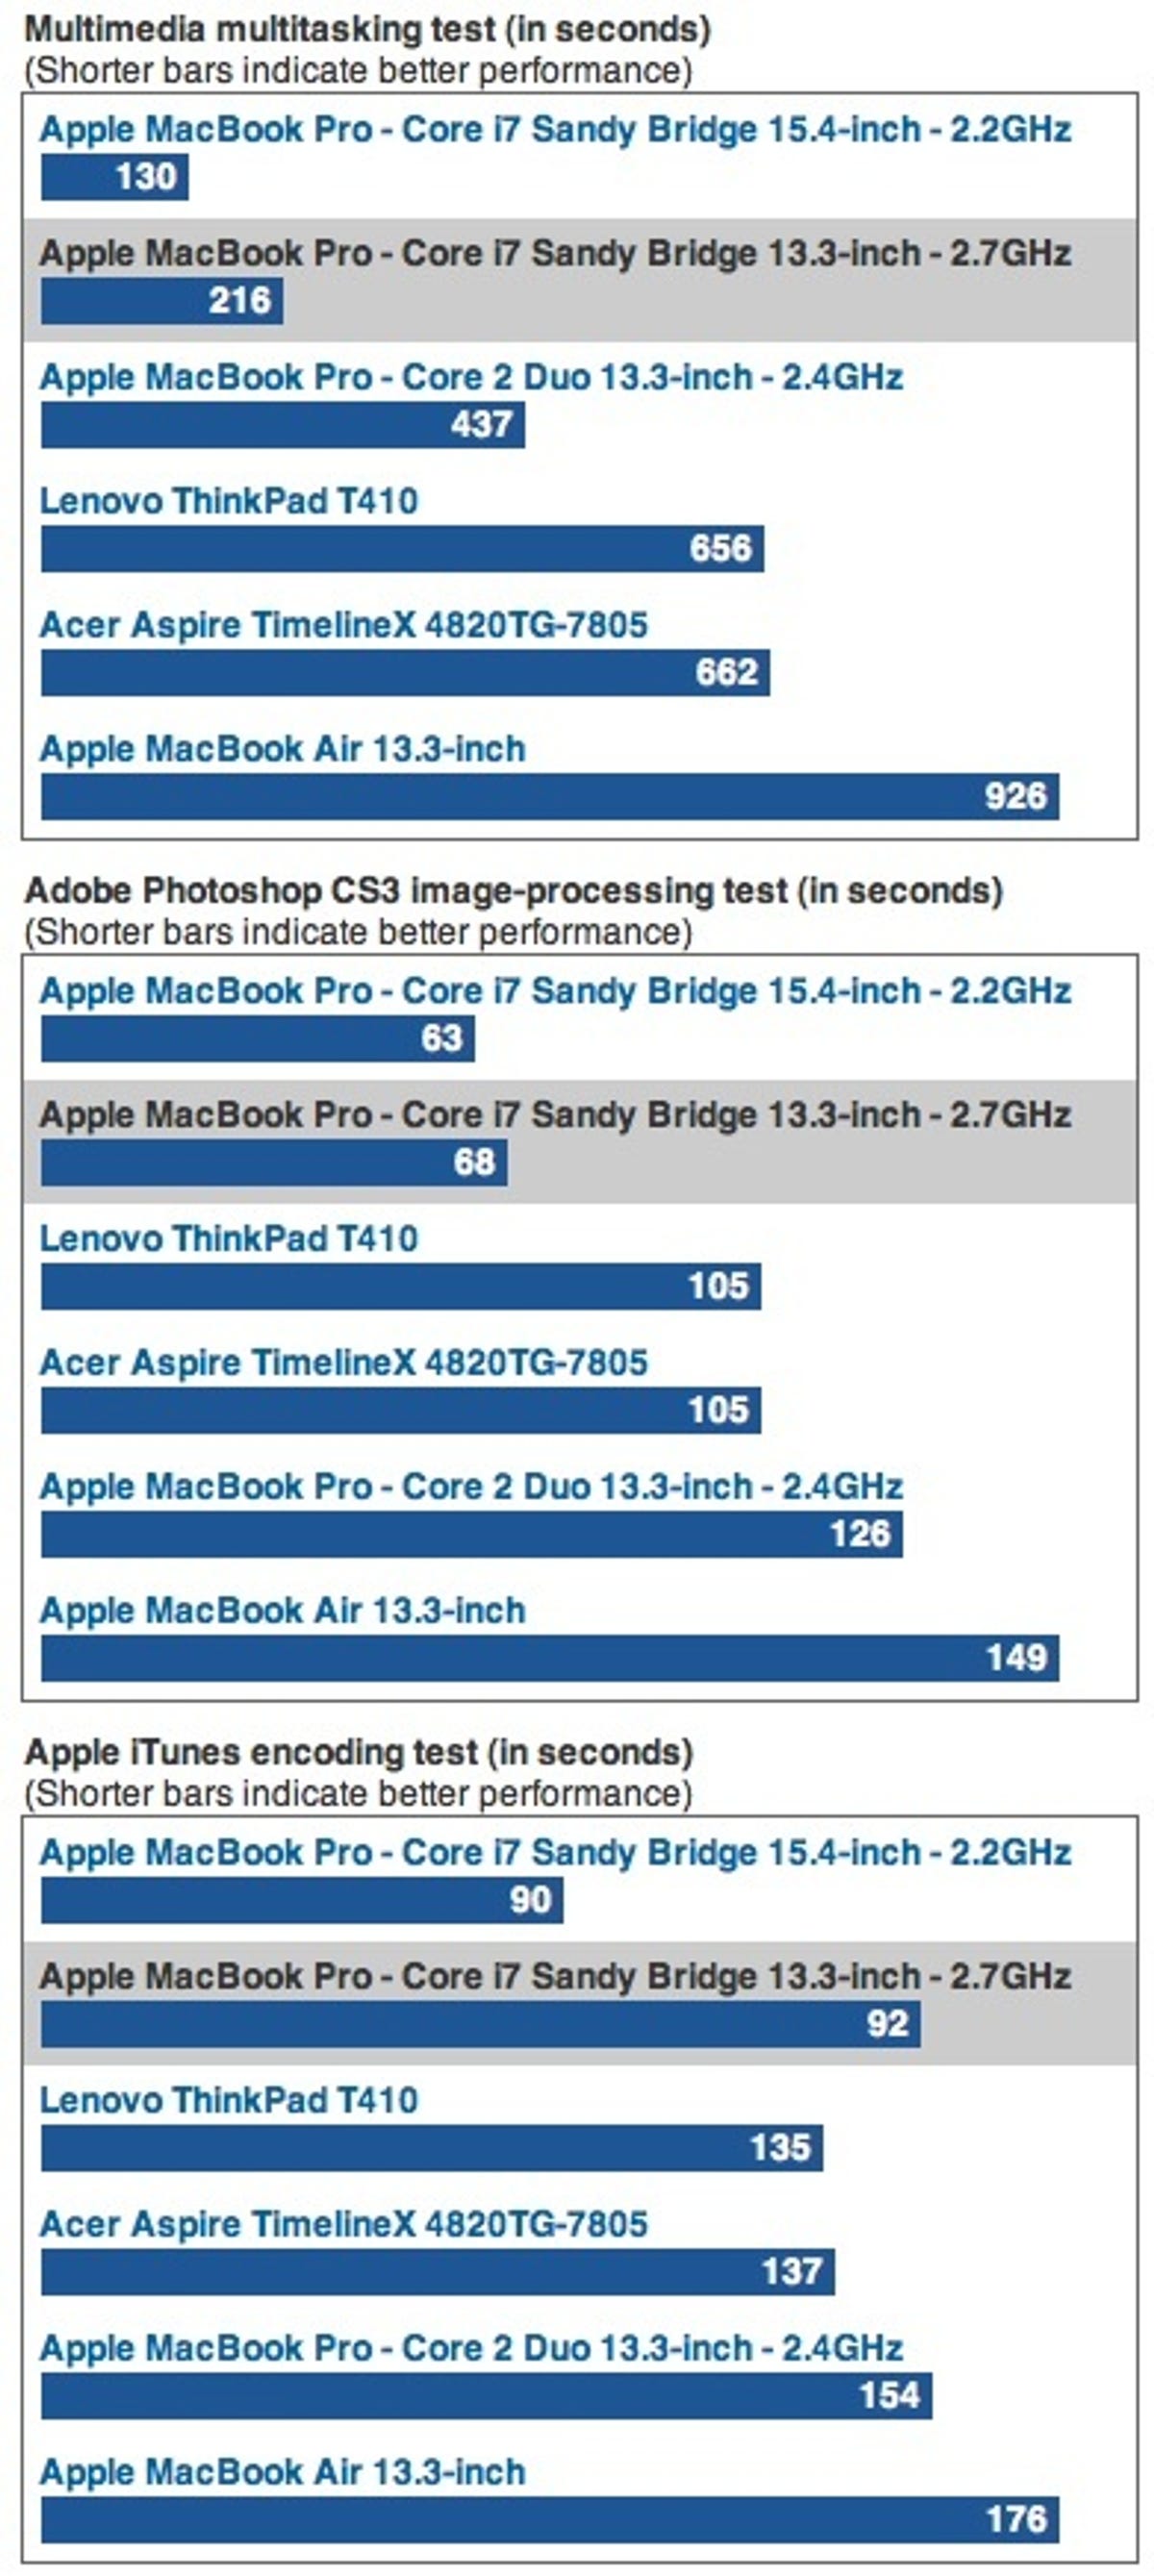 'Sandy Bridge' MacBook Pros versus 2010 MacBook Air.  Though likely faster than a Sandy Bridge MBA, this is another indicator of Sandy Bridge performance.